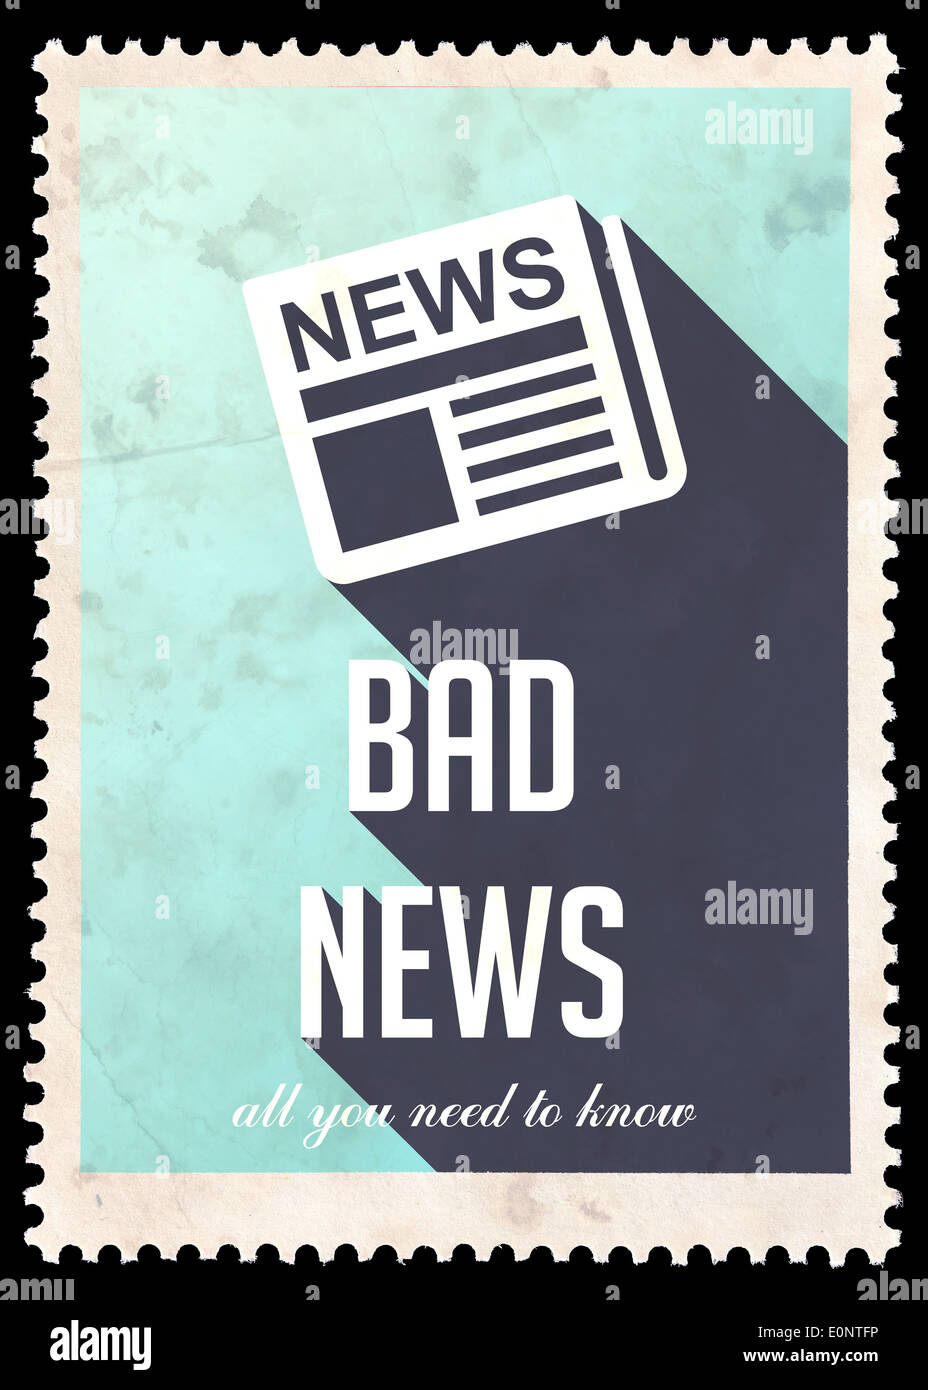 Bad News on Blue in Flat Design. Stock Photo